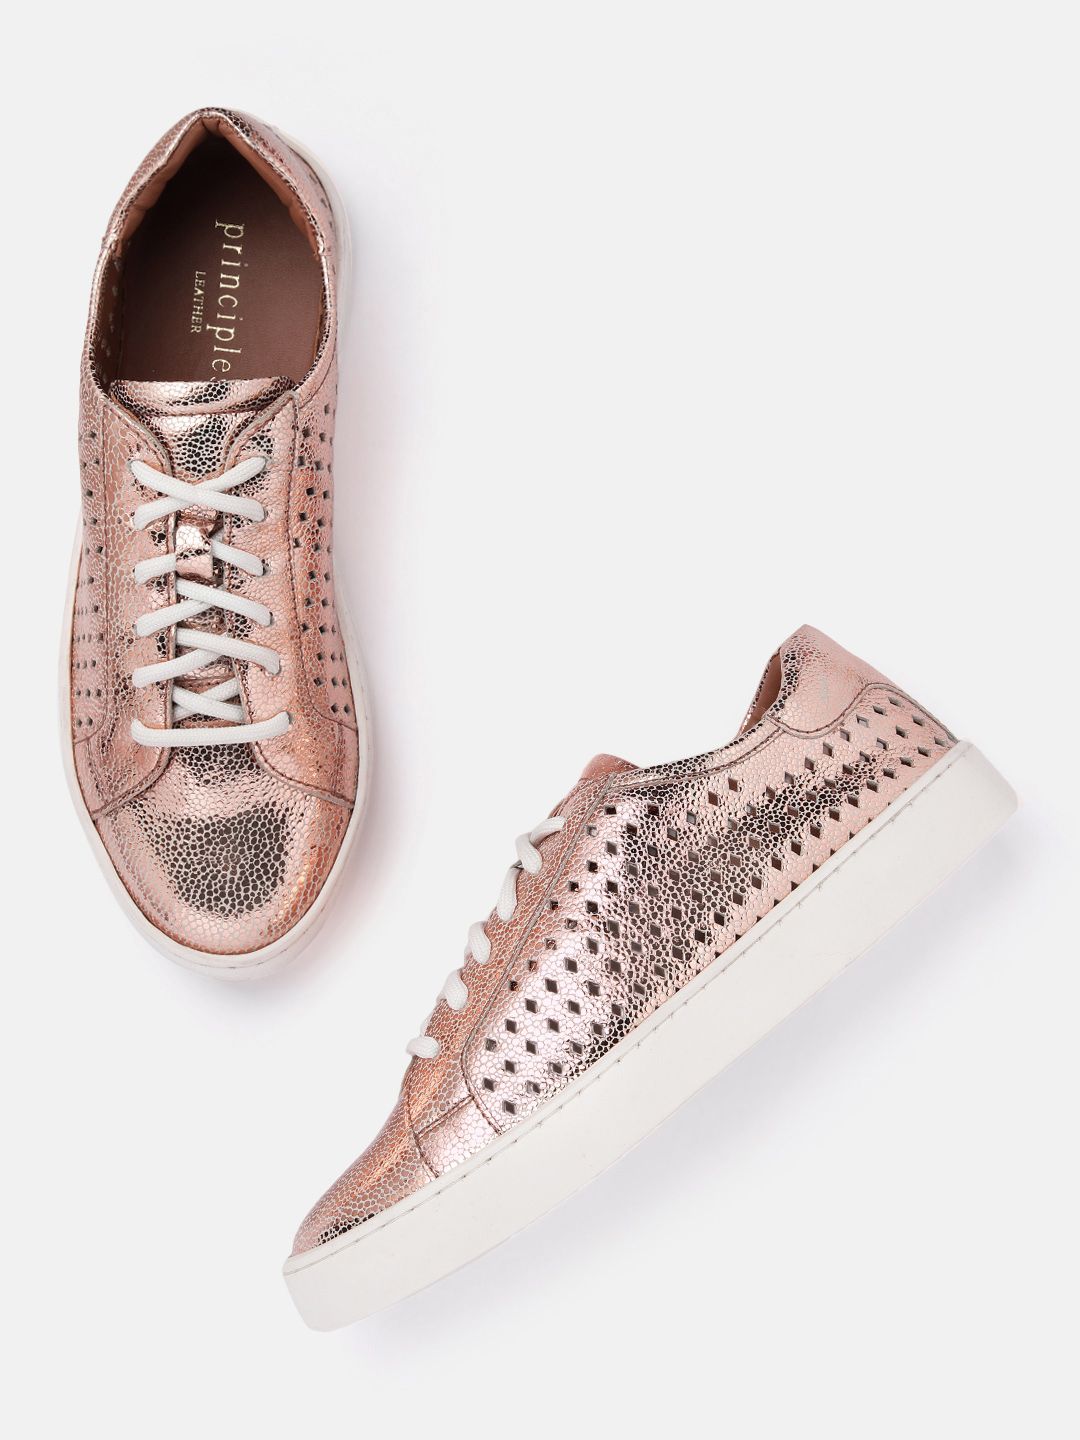 DOROTHY PERKINS Women Snake Skin Textured Sneakers with Laser Cuts Price in India